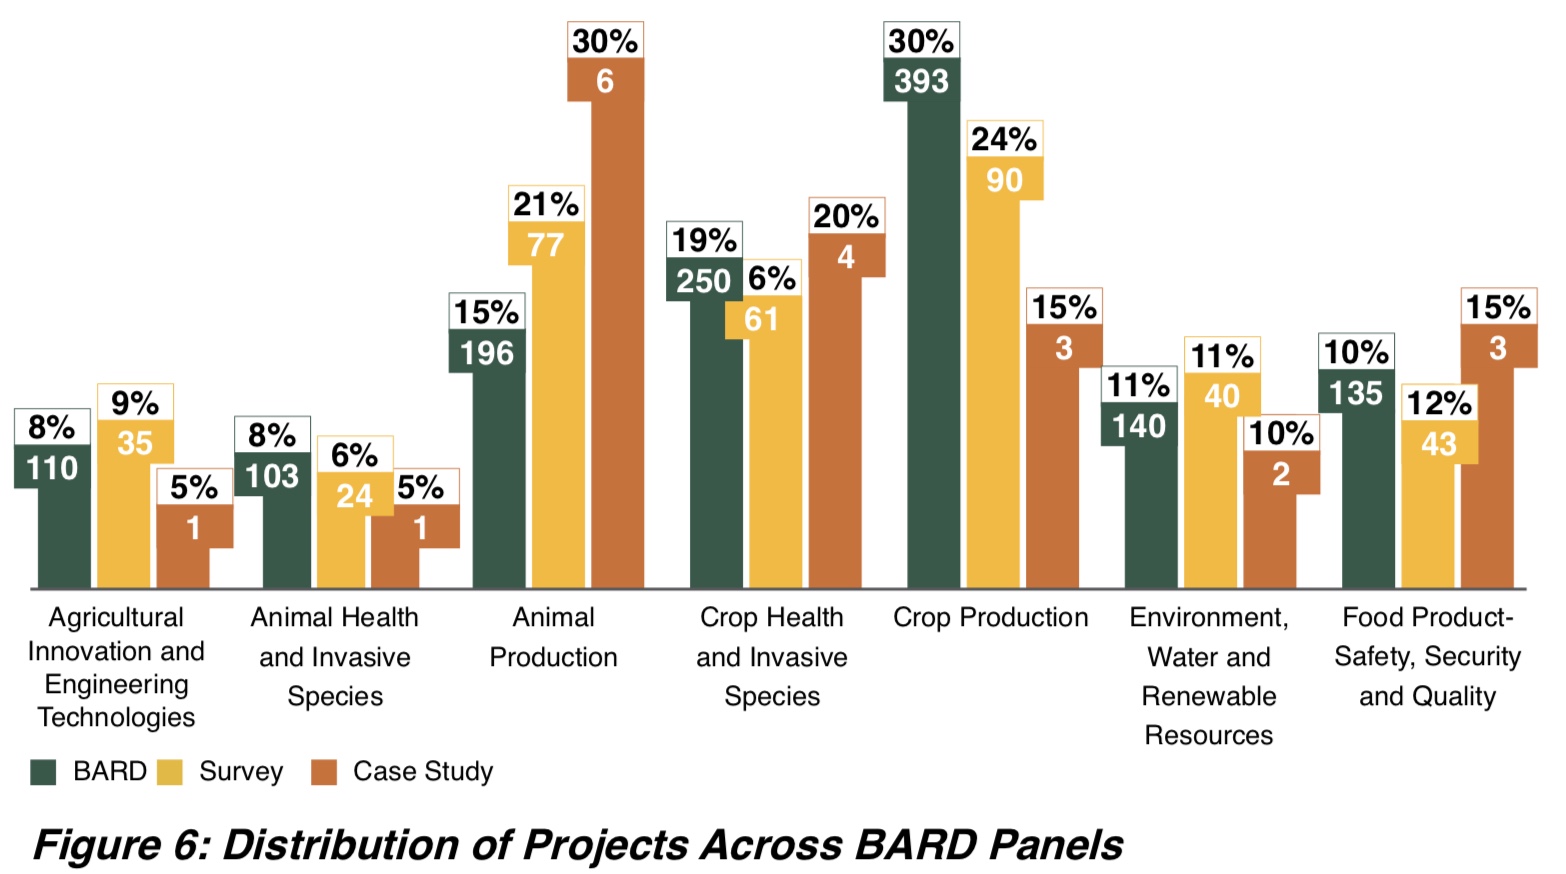 Figure 6: Distribution of Projects Across BARD Panels